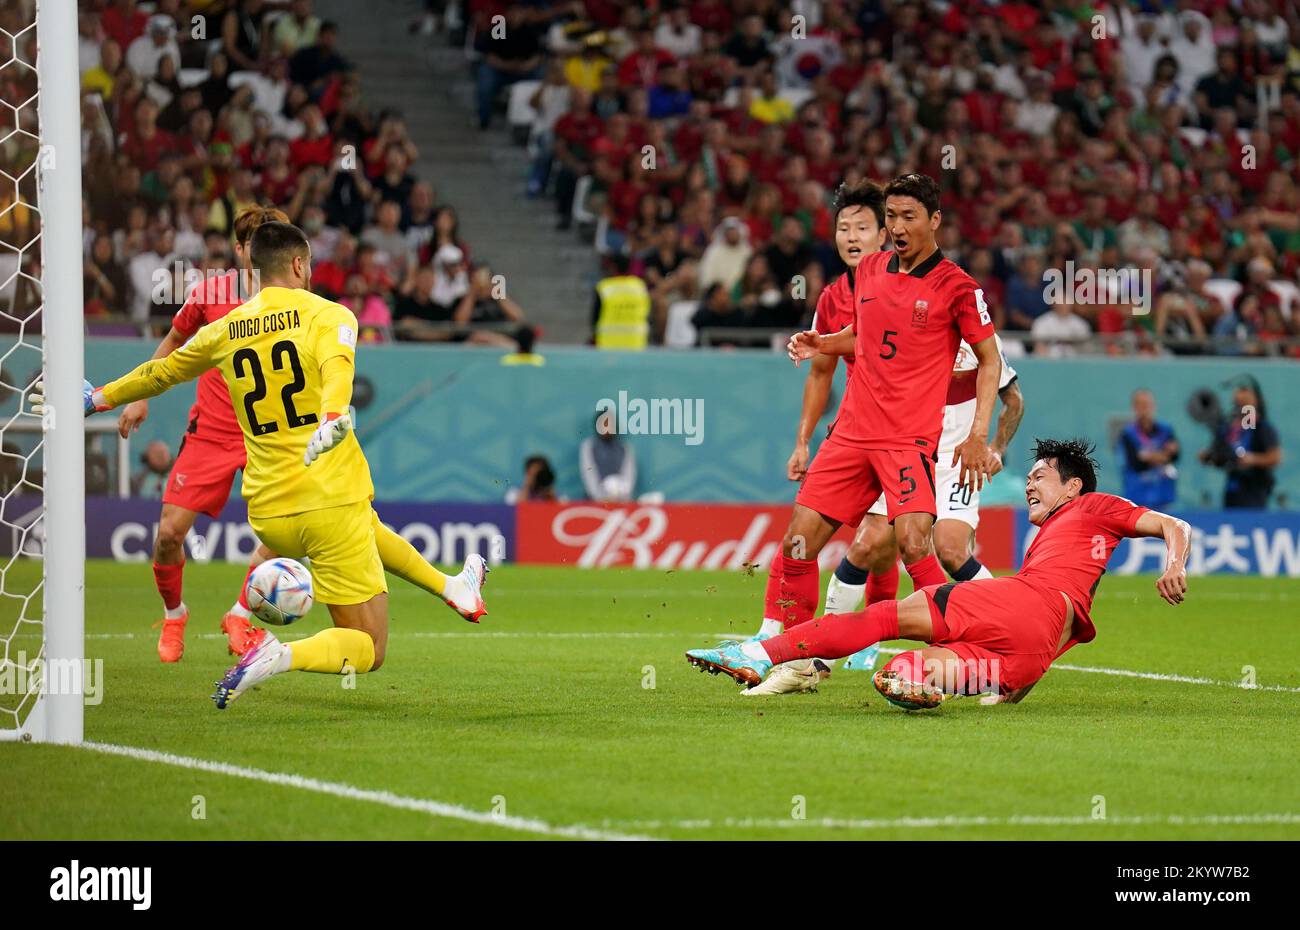 South Korea's Kim Young-Gwon scoring the equalising goal to level the score at 1-1 during the FIFA World Cup Group H match at the Education City Stadium in Al-Rayyan, Qatar. Picture date: Friday December 2, 2022. Stock Photo